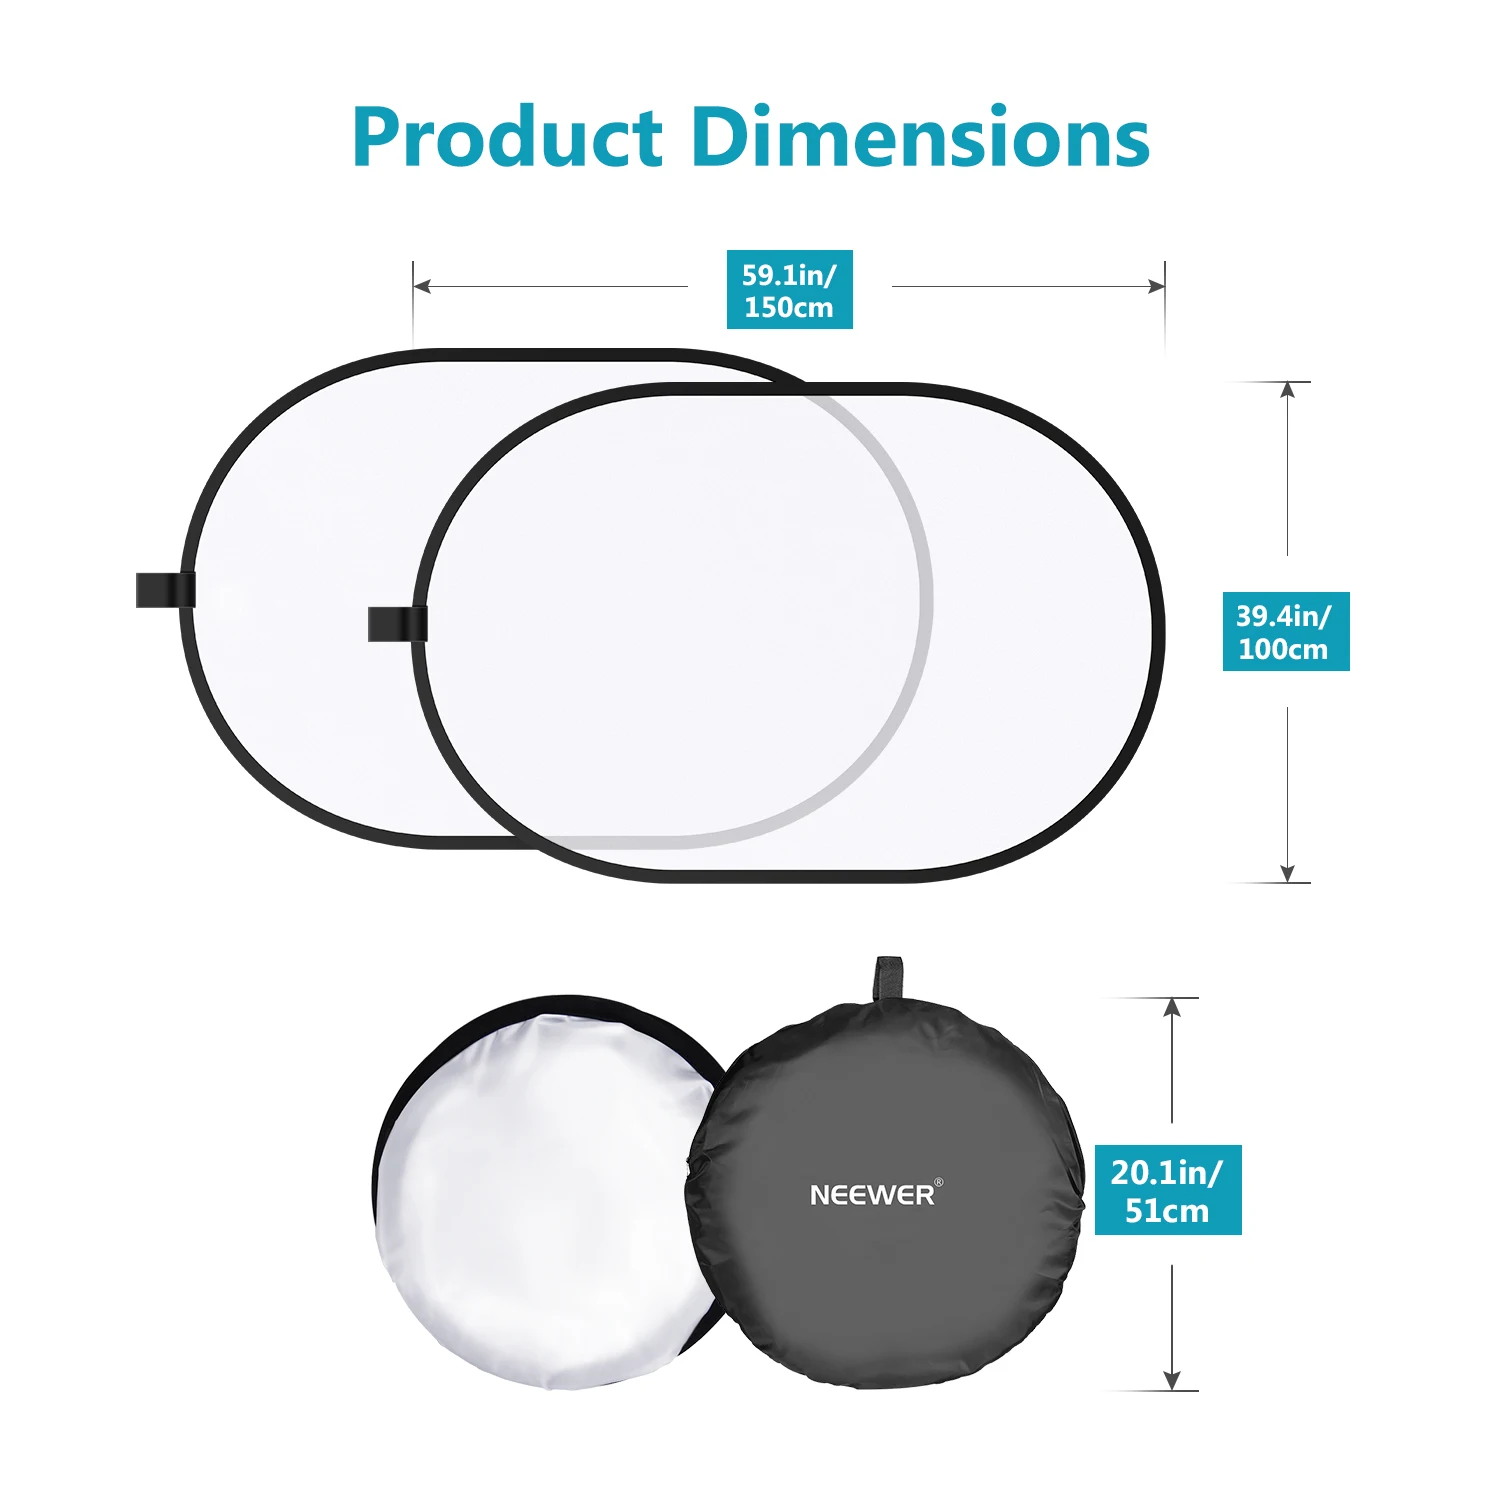 39.4 x 59 inches Neewer Photography Studio Lighting Reflector Pop-out Foldable Soft Diffuser Disc Panel with Carrying Case for Studio and Outdoor Portrait Product Photography,Video Shooting 